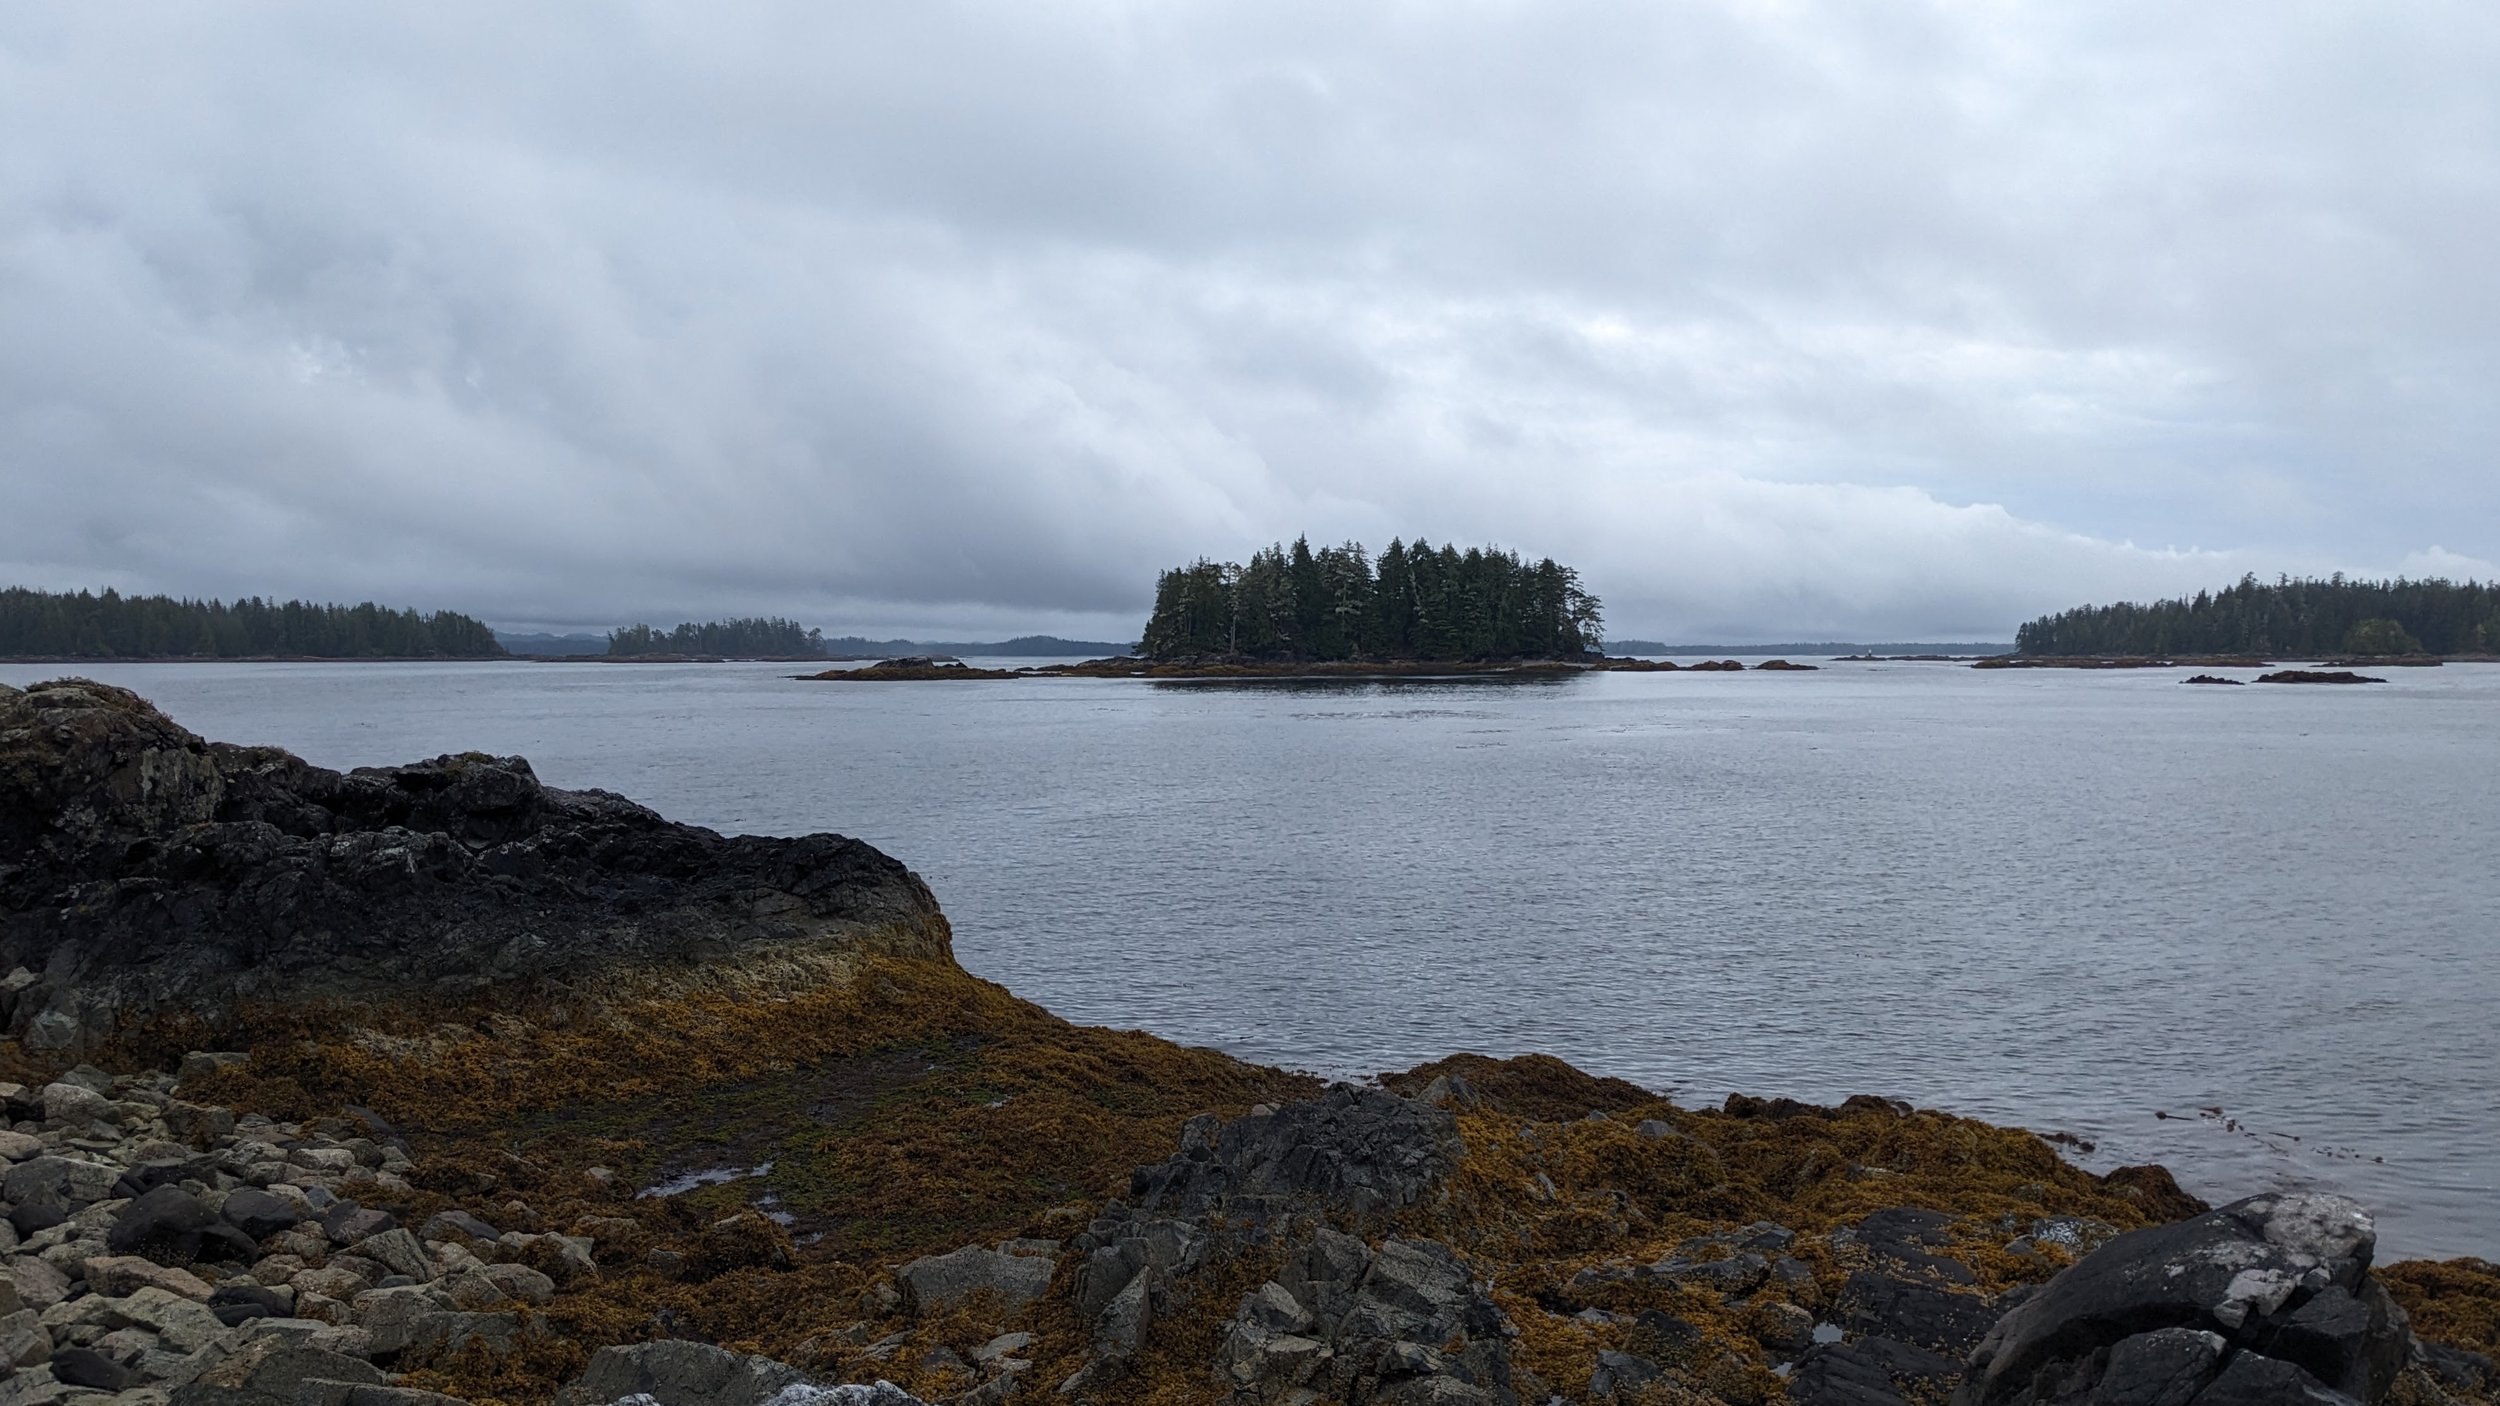  Looking back at Seaforth Channel from the Roar Islets. 